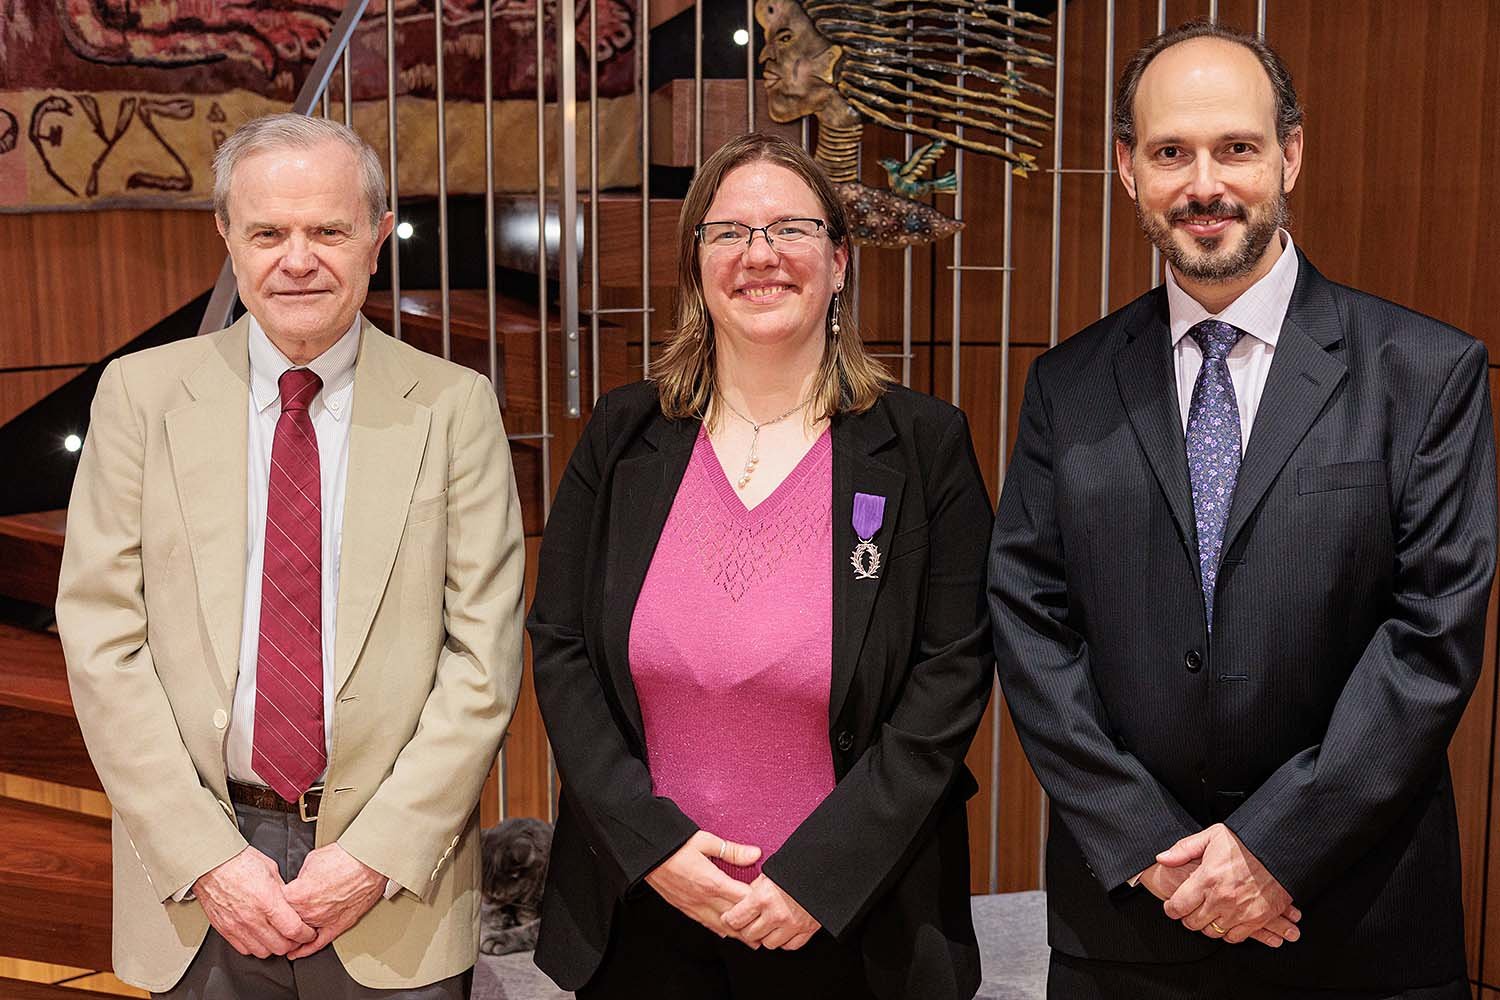 From left to right:  Michael Evans , professor and chair of the Department of Statistical Sciences;  Fanny Chevalier ; and  Eyal de Lara , professor and chair of the Department of Computer Science. 